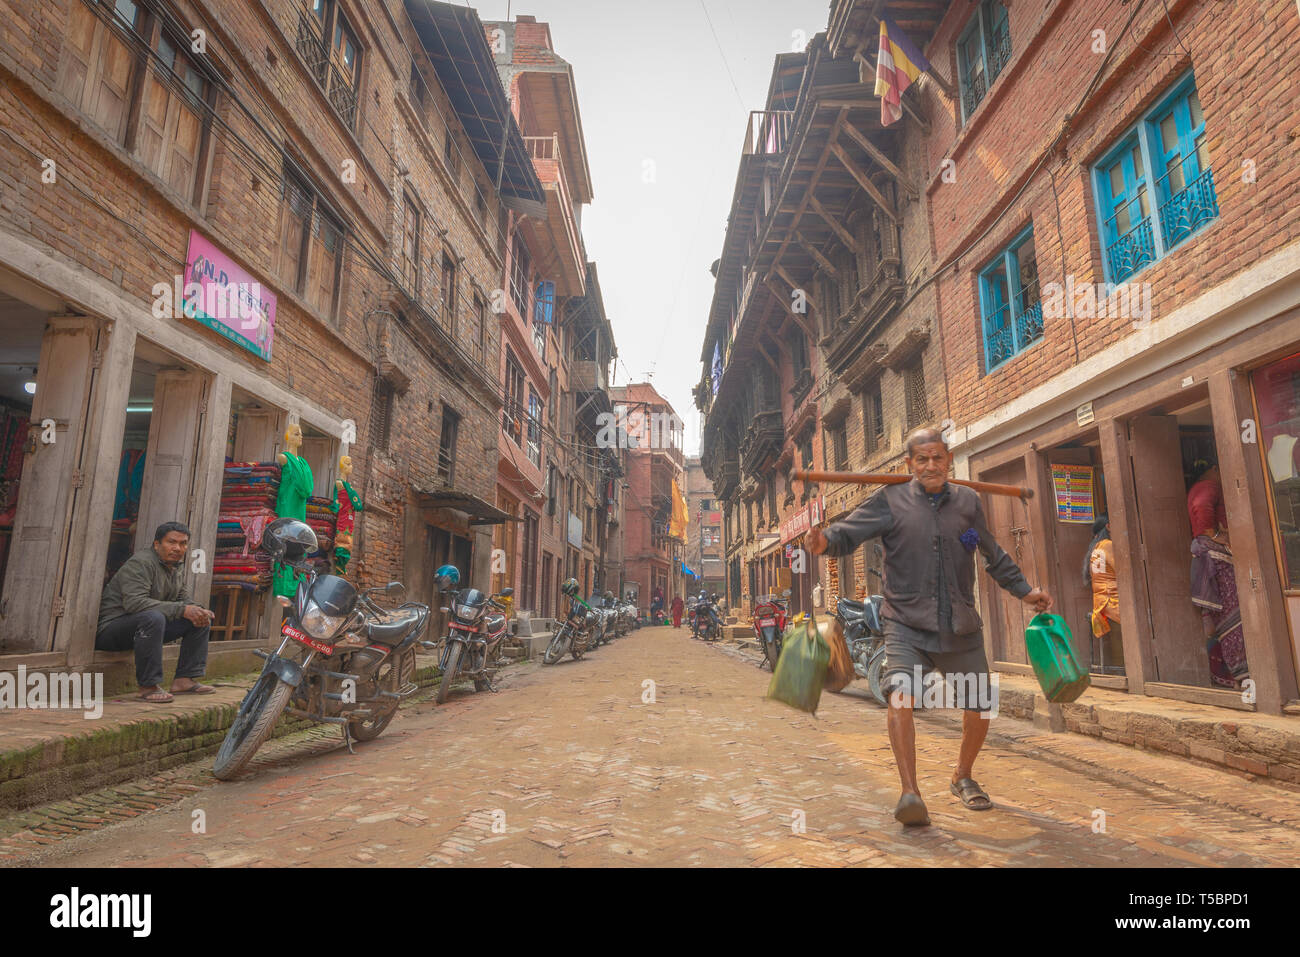 BHAKTAPUR, NEPAL - APRIL 5, 2019: Old man porting plastic cans walking down a narrow street taken during a partly sunny afternoon Stock Photo